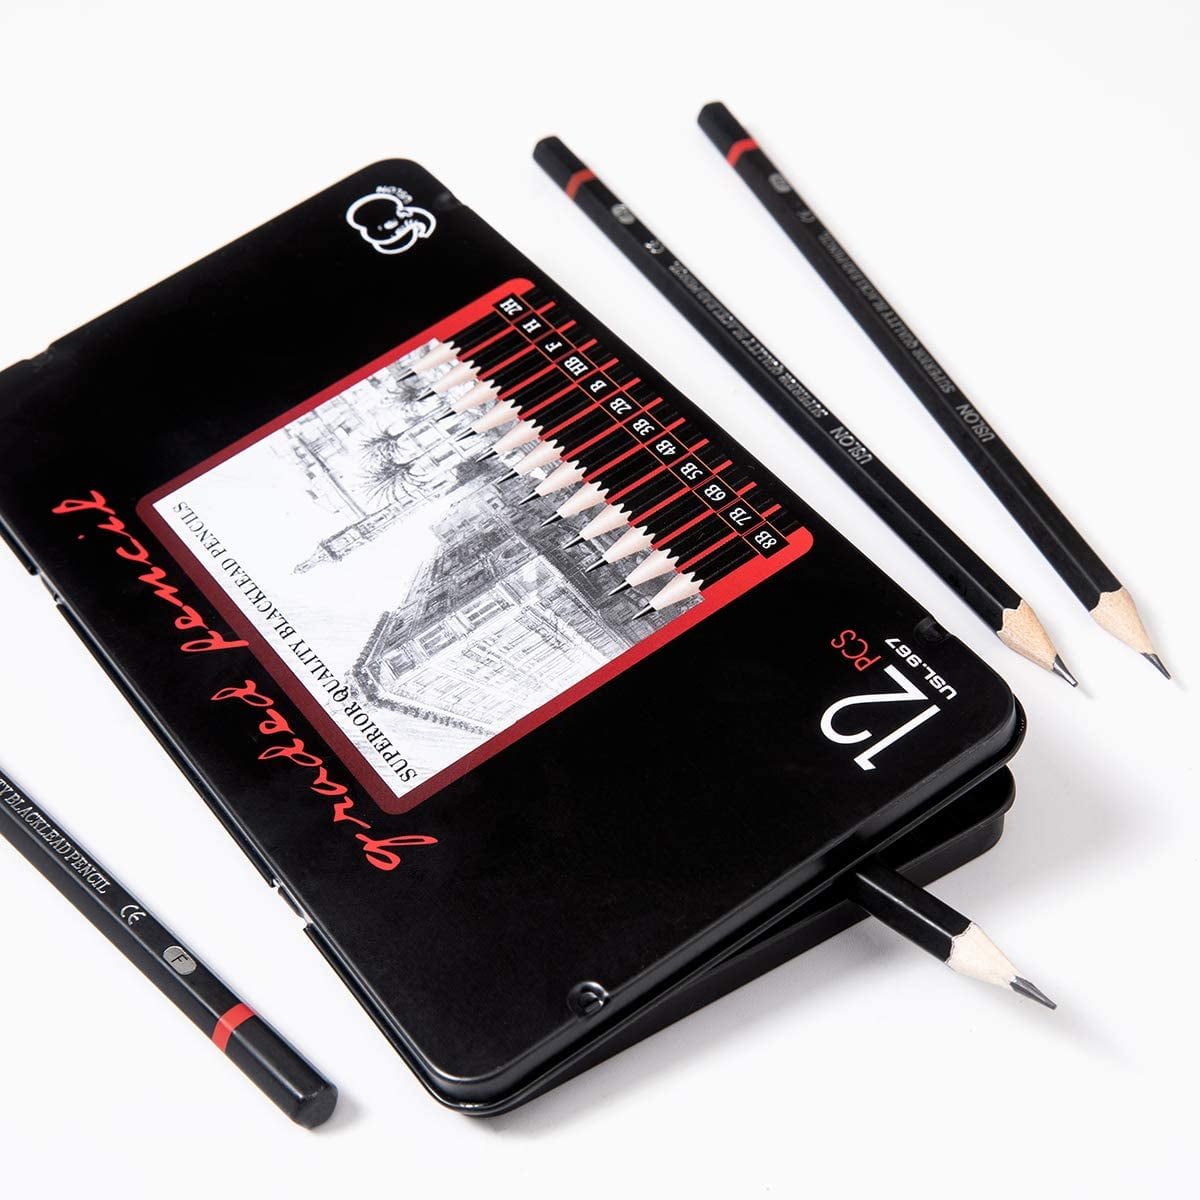 SELPONT ack Drawing Kit Includes Drawing Pad & Multimedia Pad with Video  Course & How-to Guide, Art Supplies for Adults, Teens, Kids